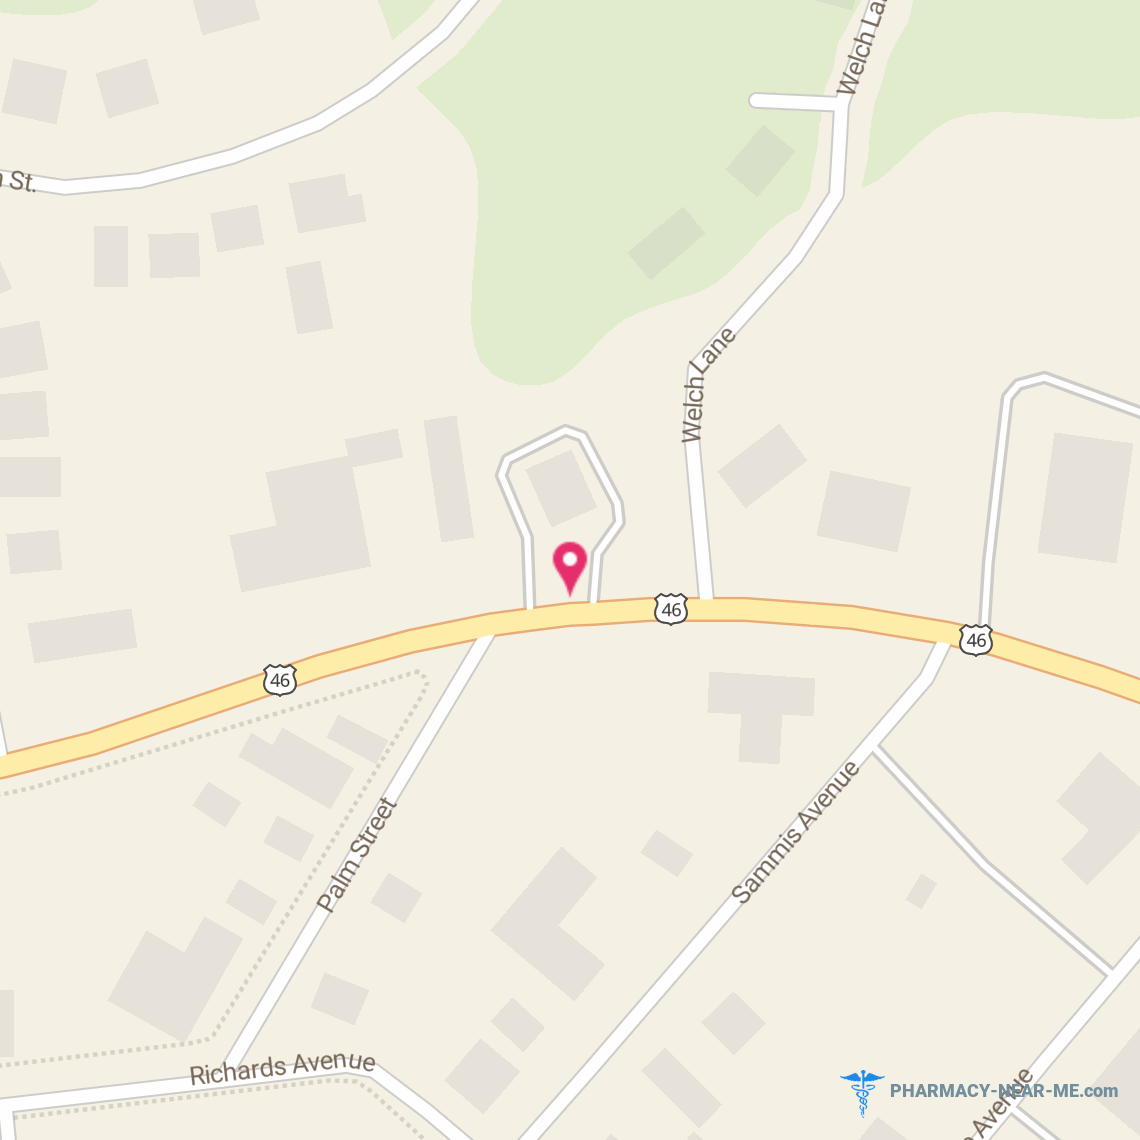 SHOPRITE PHARMACY - Pharmacy Hours, Phone, Reviews & Information: 437 Route 46, Dover, New Jersey 07803, United States